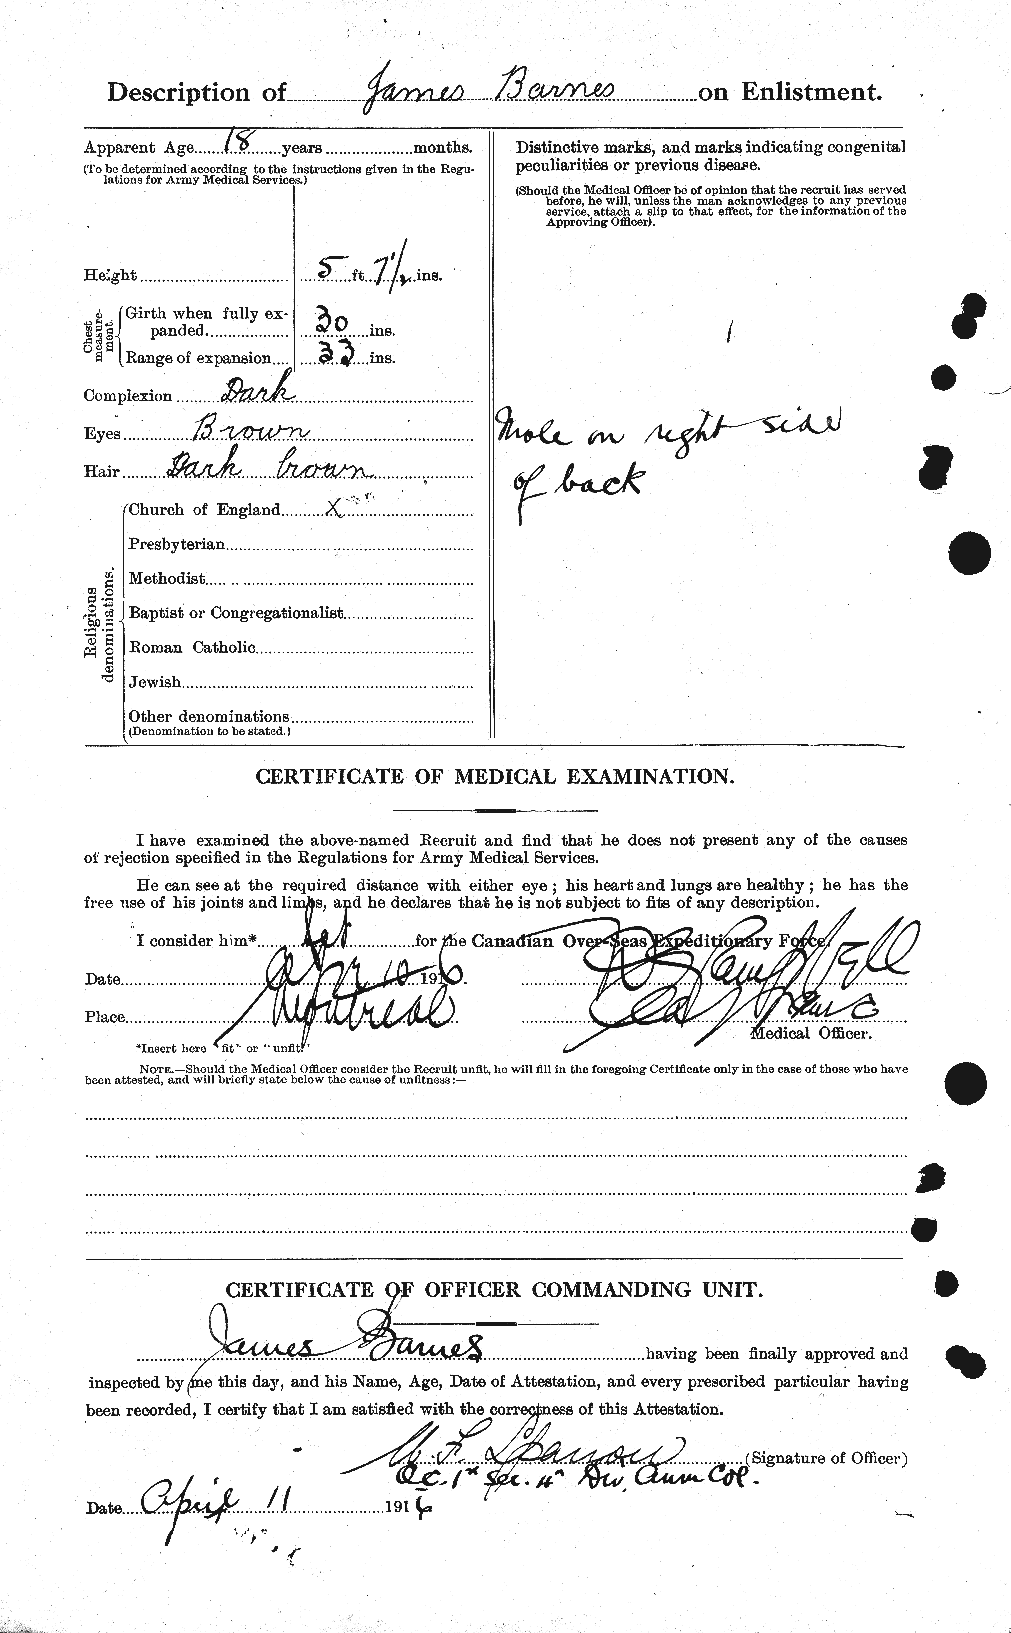 Personnel Records of the First World War - CEF 227470b